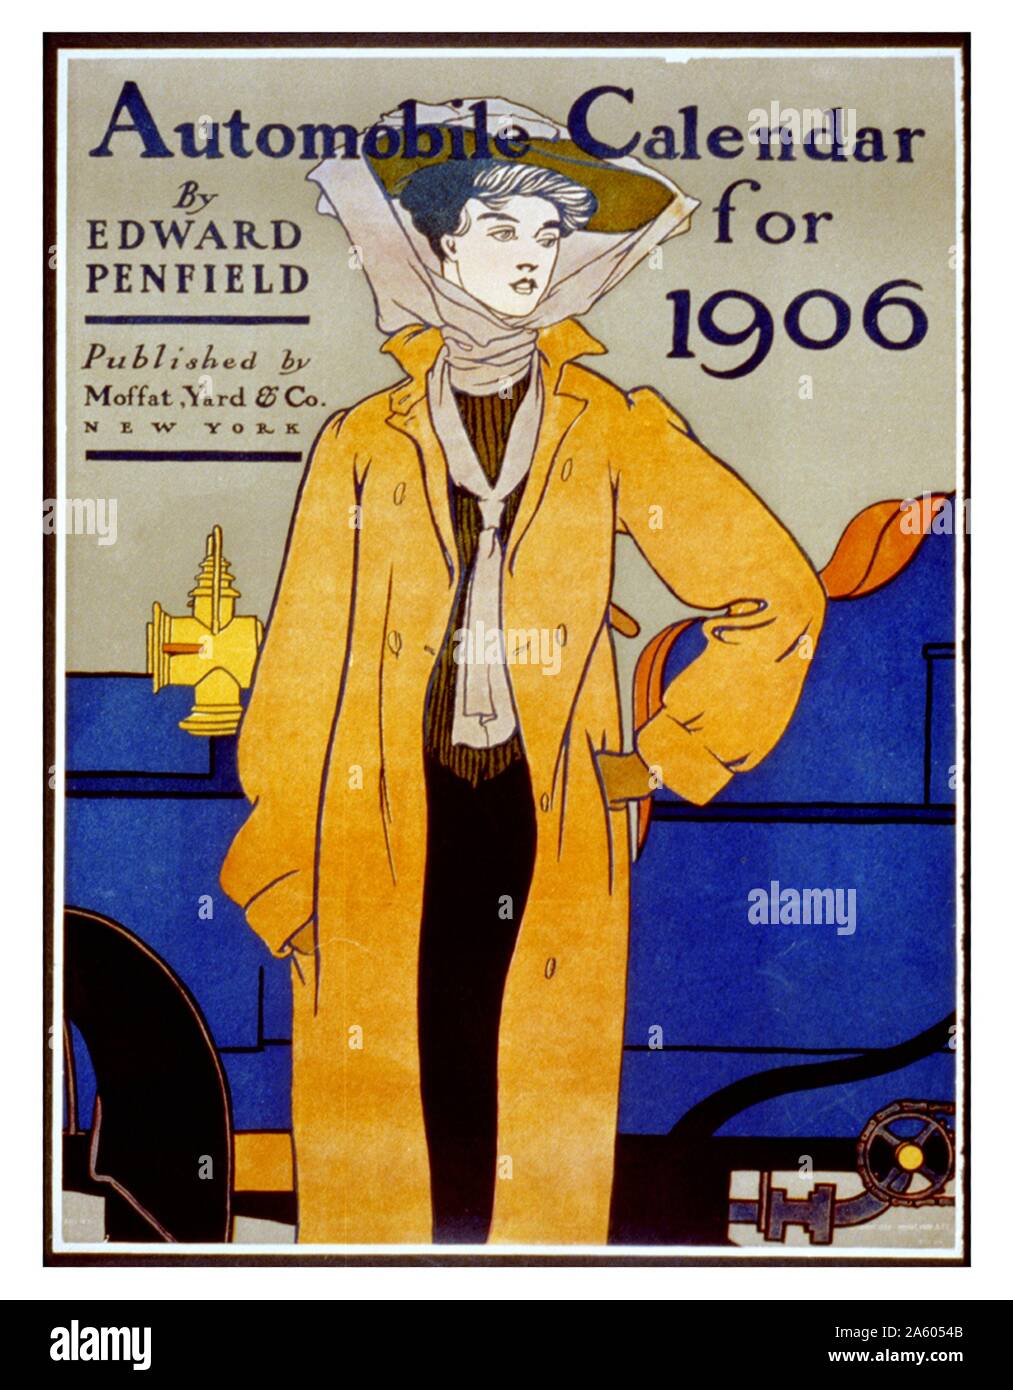 Automobile calendar for 1906. Poster shows a woman wearing a driving coat, gloves, and a hat secured by a scarf, and partial view of automobile in background. Stock Photo